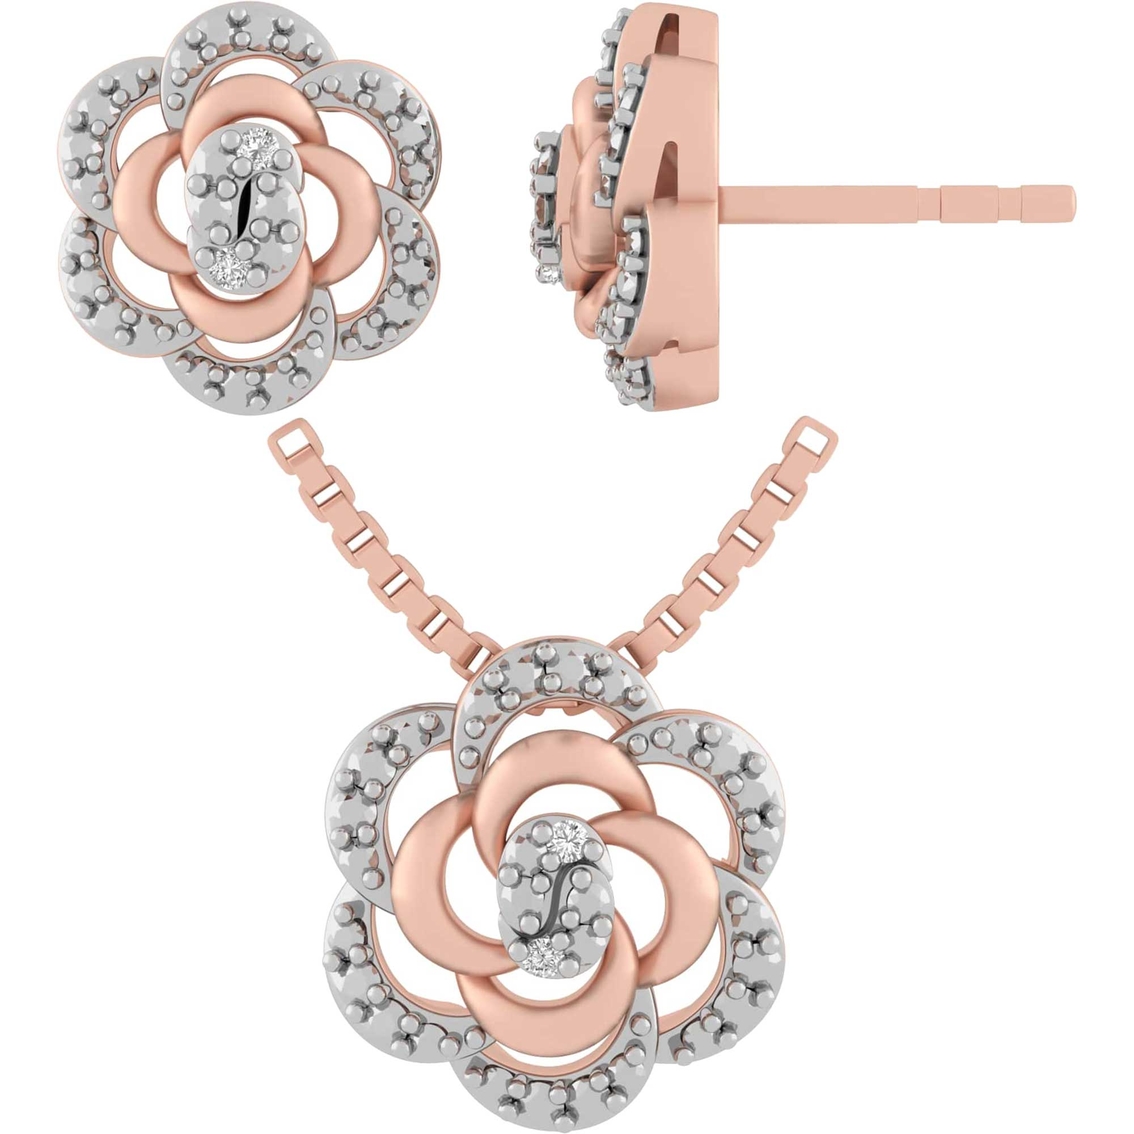 Sterling Silver 10K Rose Goldtone Diamond Accent Earrings and Pendant Flower Set - Image 2 of 6